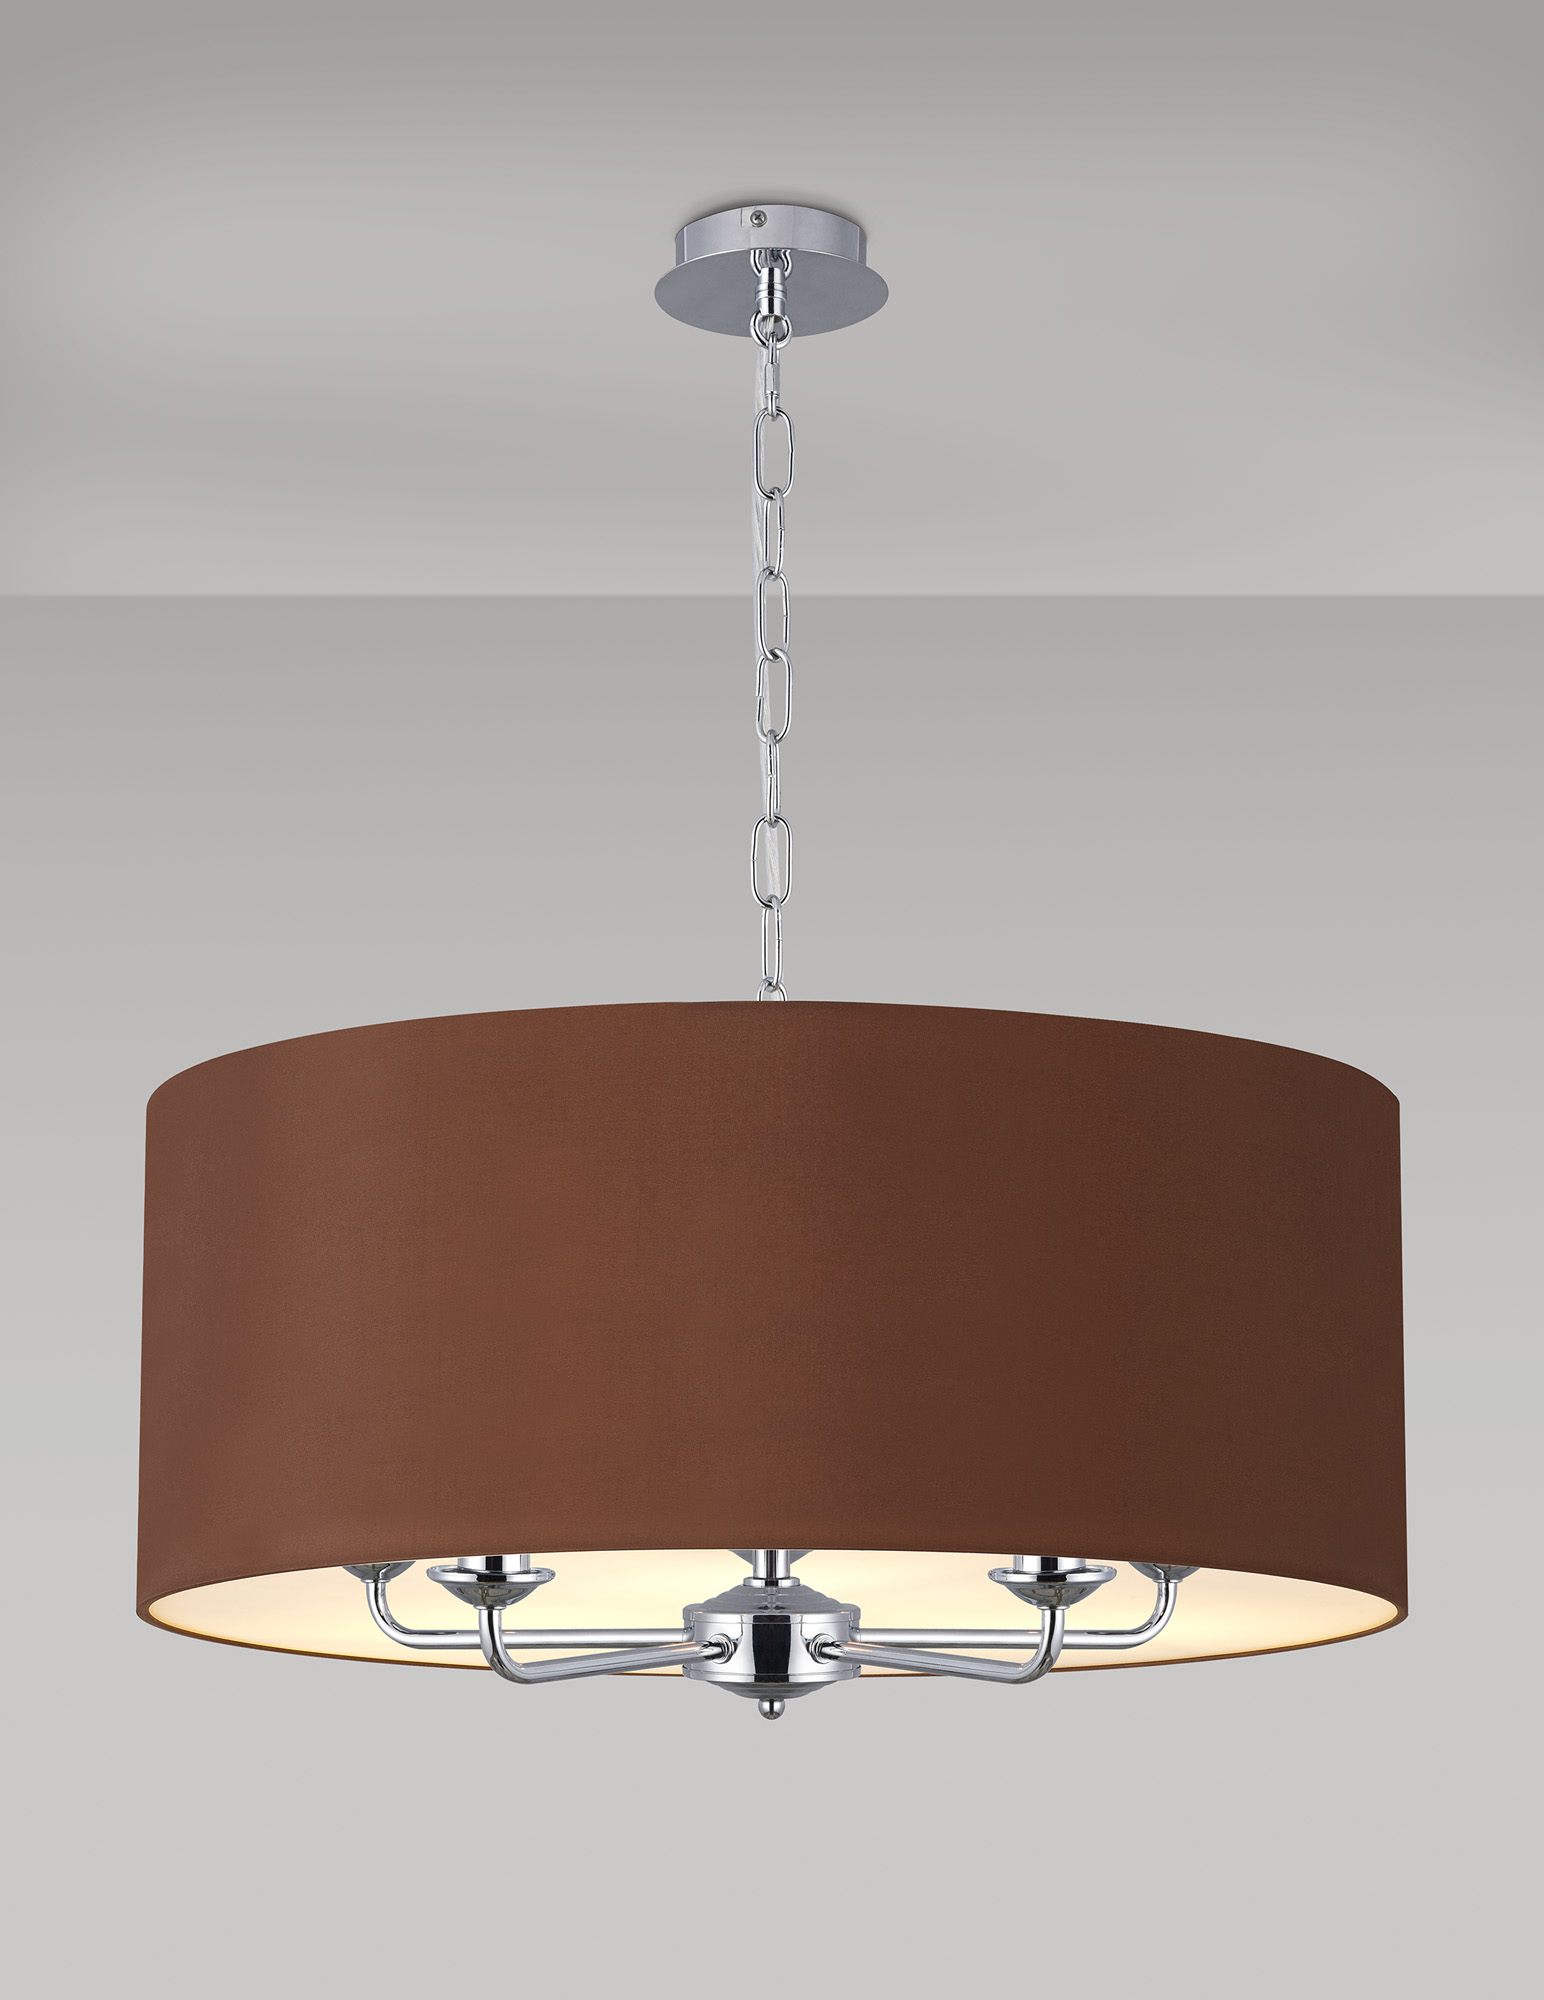 Banyan CH RC Ceiling Lights Deco Multi Arm Fittings